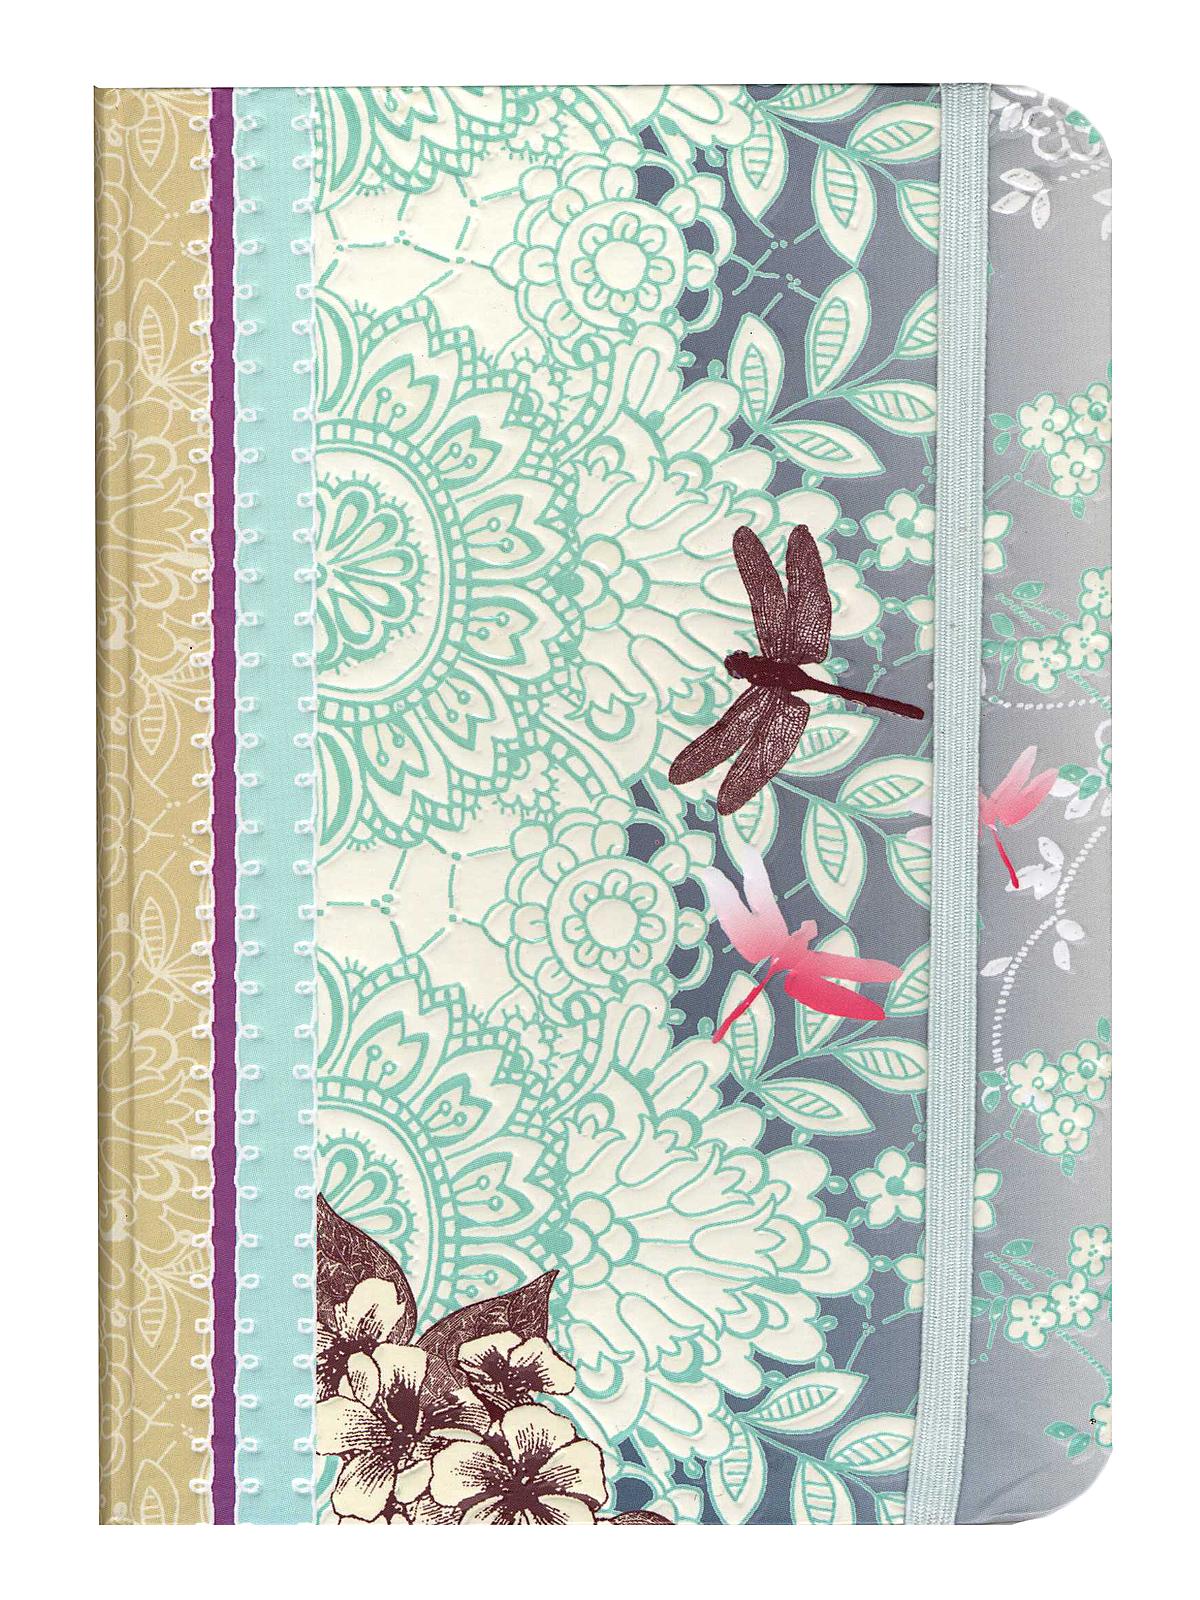 Small Format Journals Dragonfly 5 In. X 7 In. 160 Pages